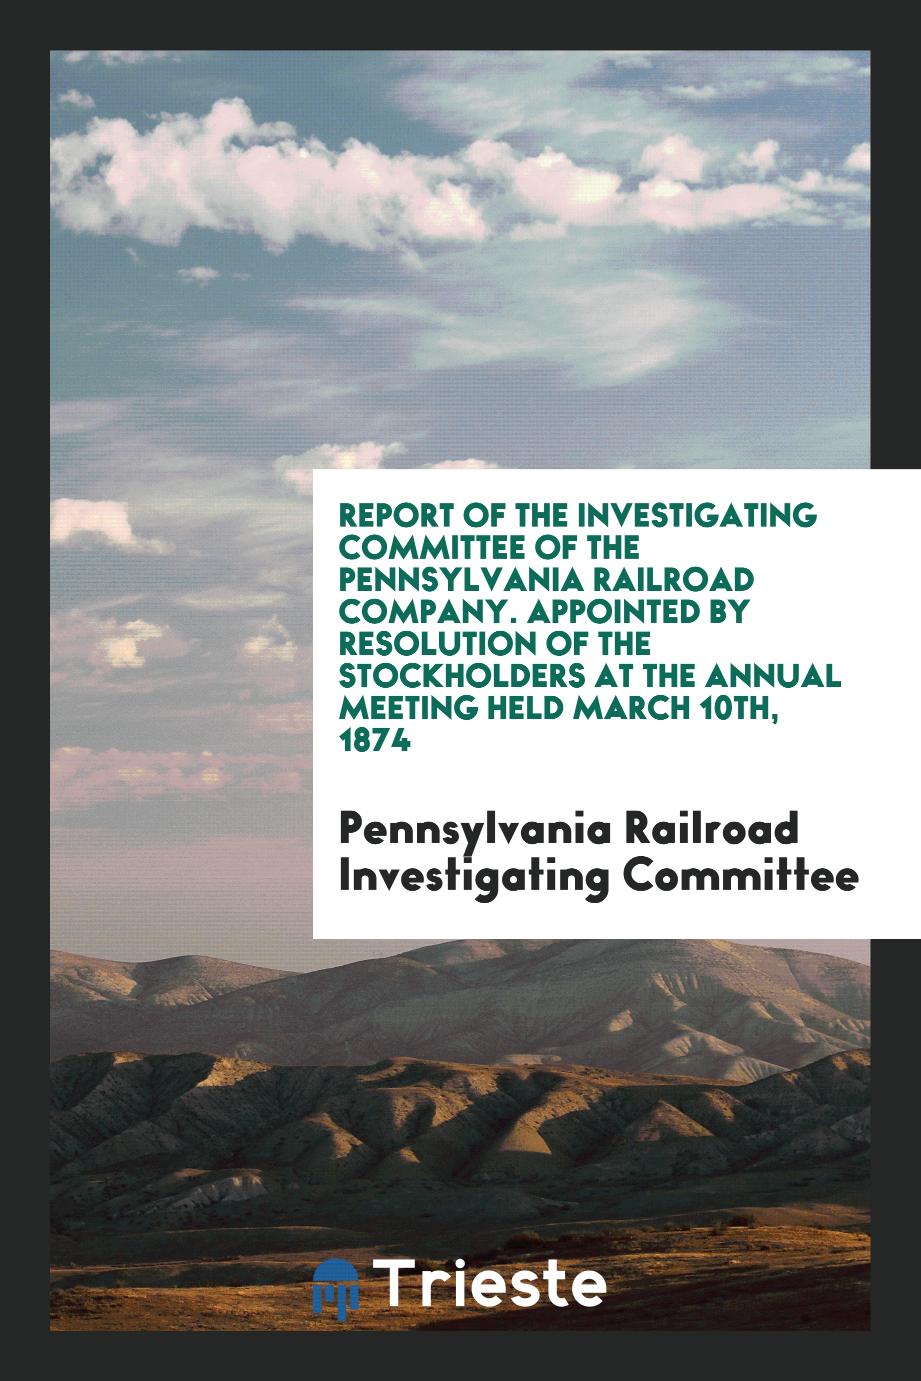 Report of the Investigating Committee of the Pennsylvania Railroad Company. Appointed by Resolution of the Stockholders at the Annual Meeting Held March 10th, 1874